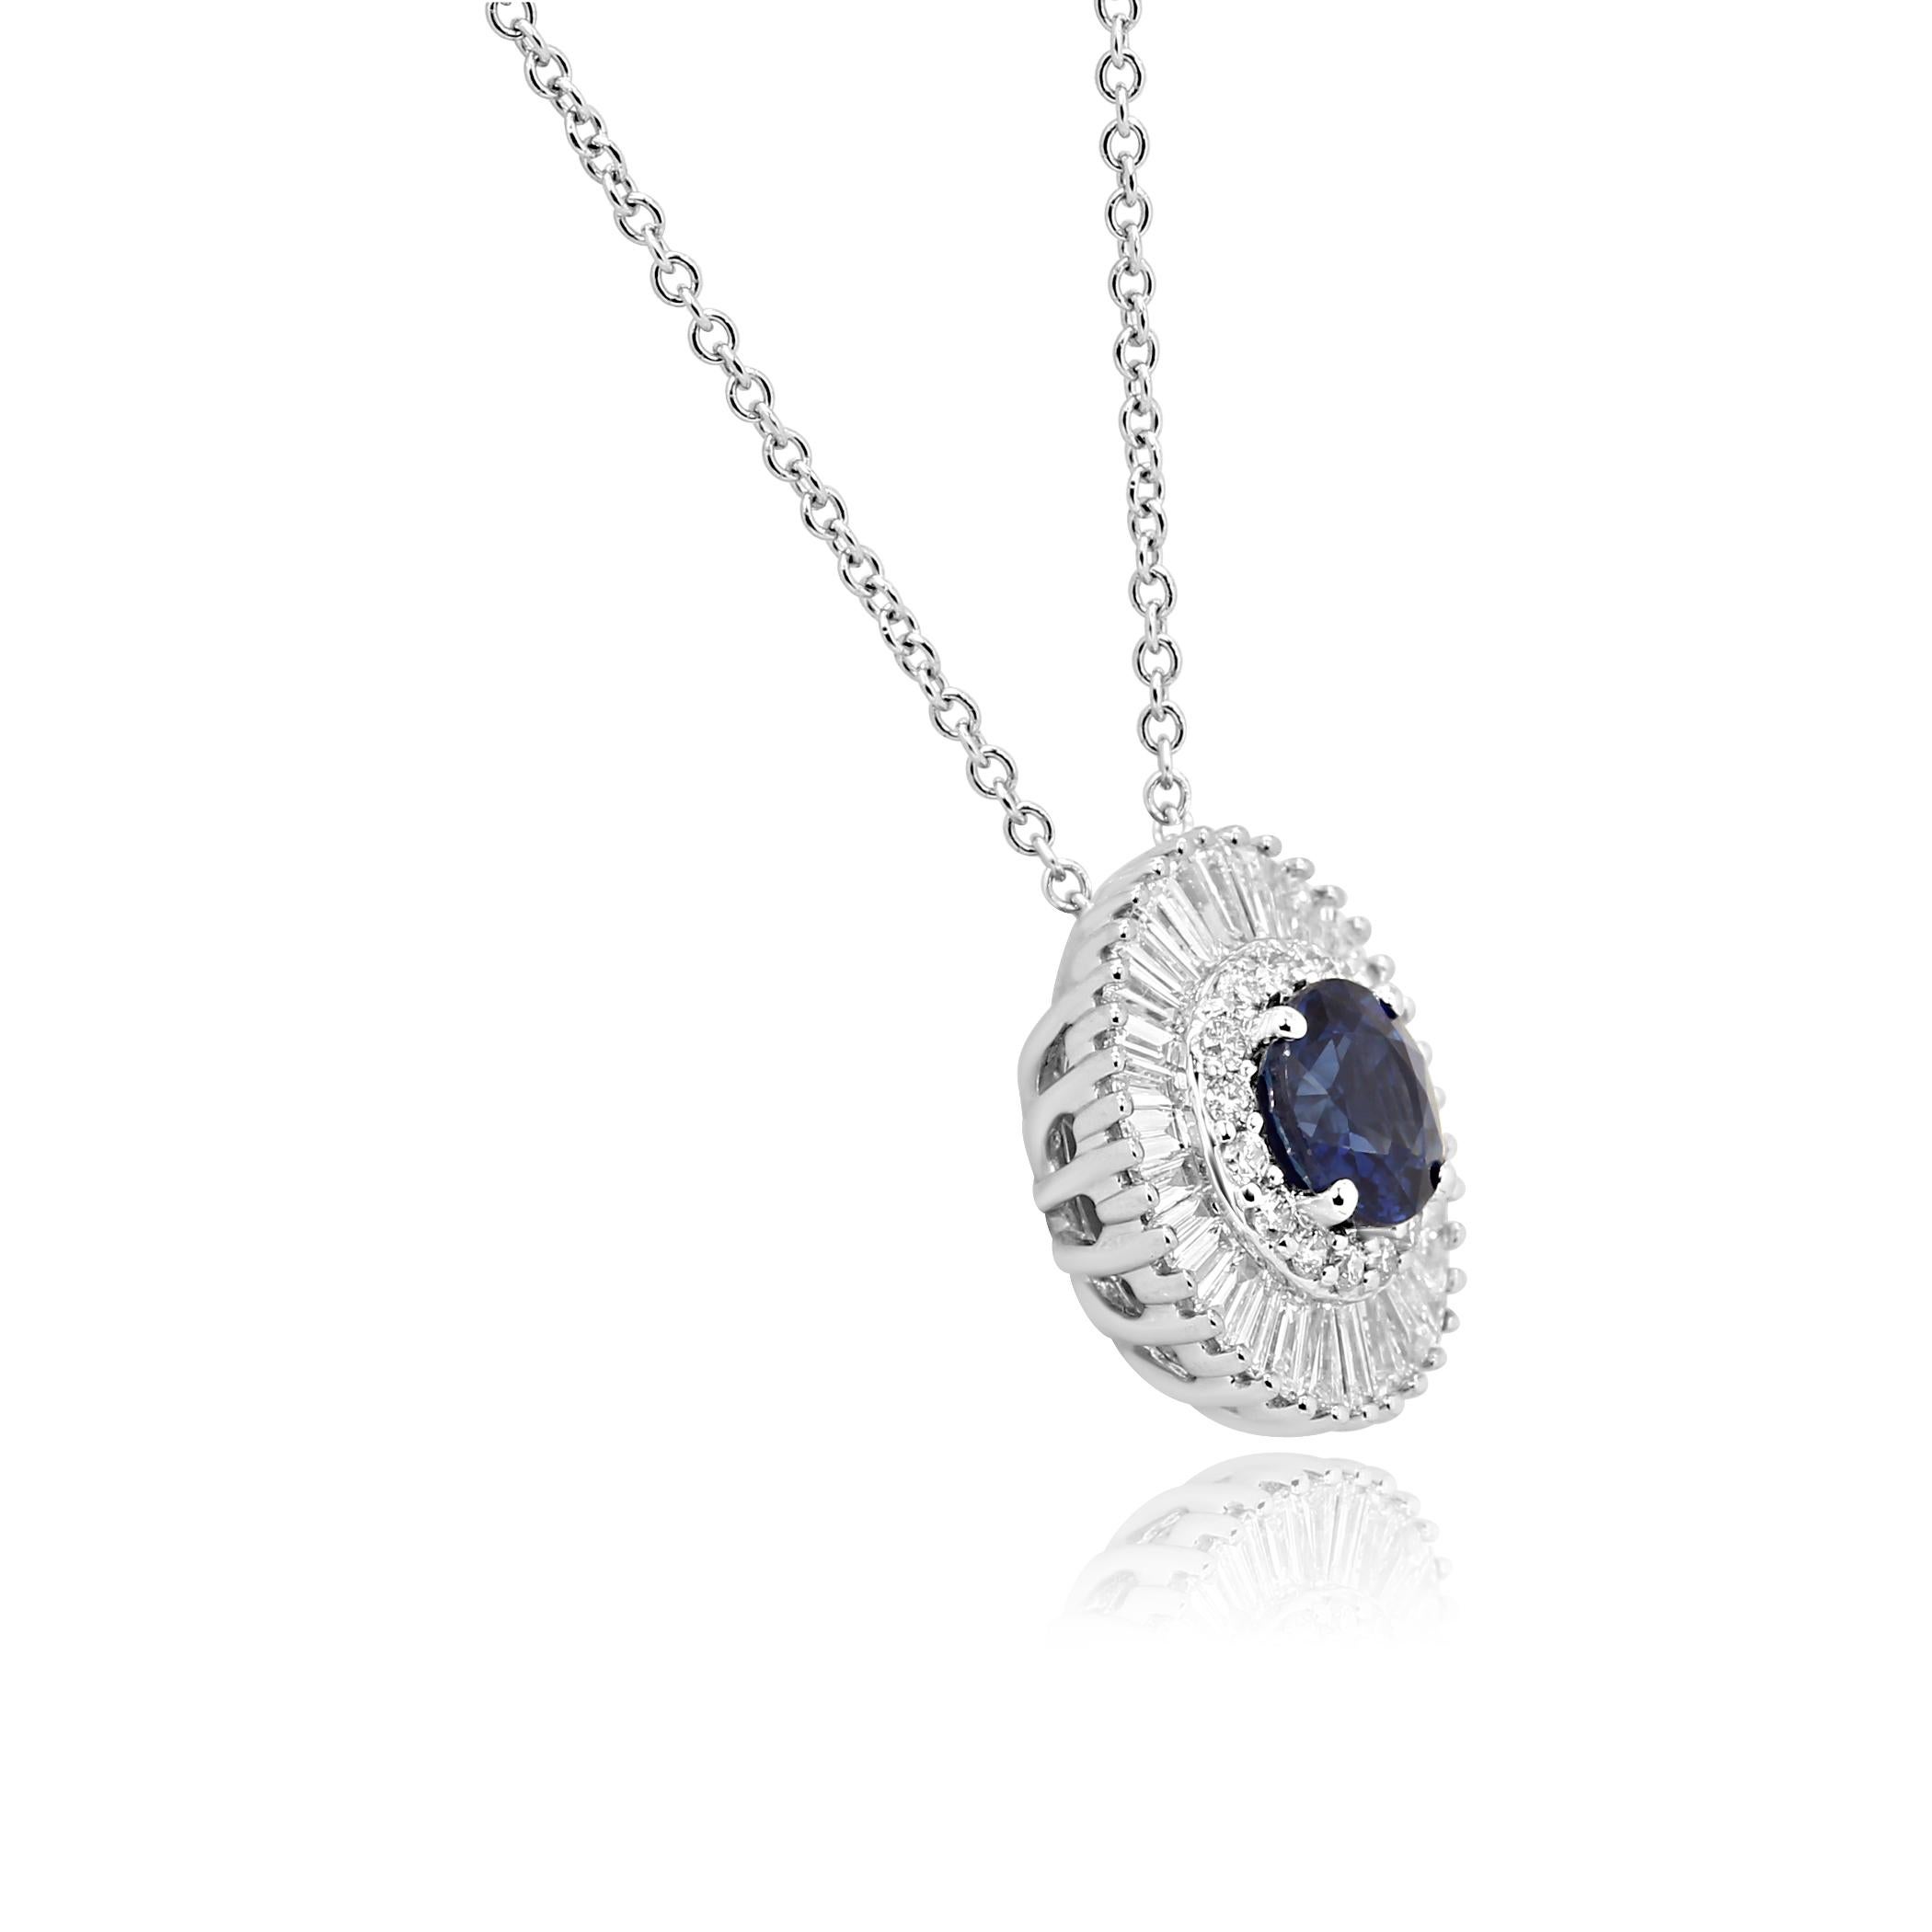 Blue Sapphire round 0.65 Carat Encircled in Double Halo of Colorless  G-H Round Brilliant VS SI clarity 0.11 Carat and Colorless Diamond Baguettes VS clarity 0.45 Carat in 14K White Gold Bridal  Art Deco Ballerina Fashion Pendant Chain